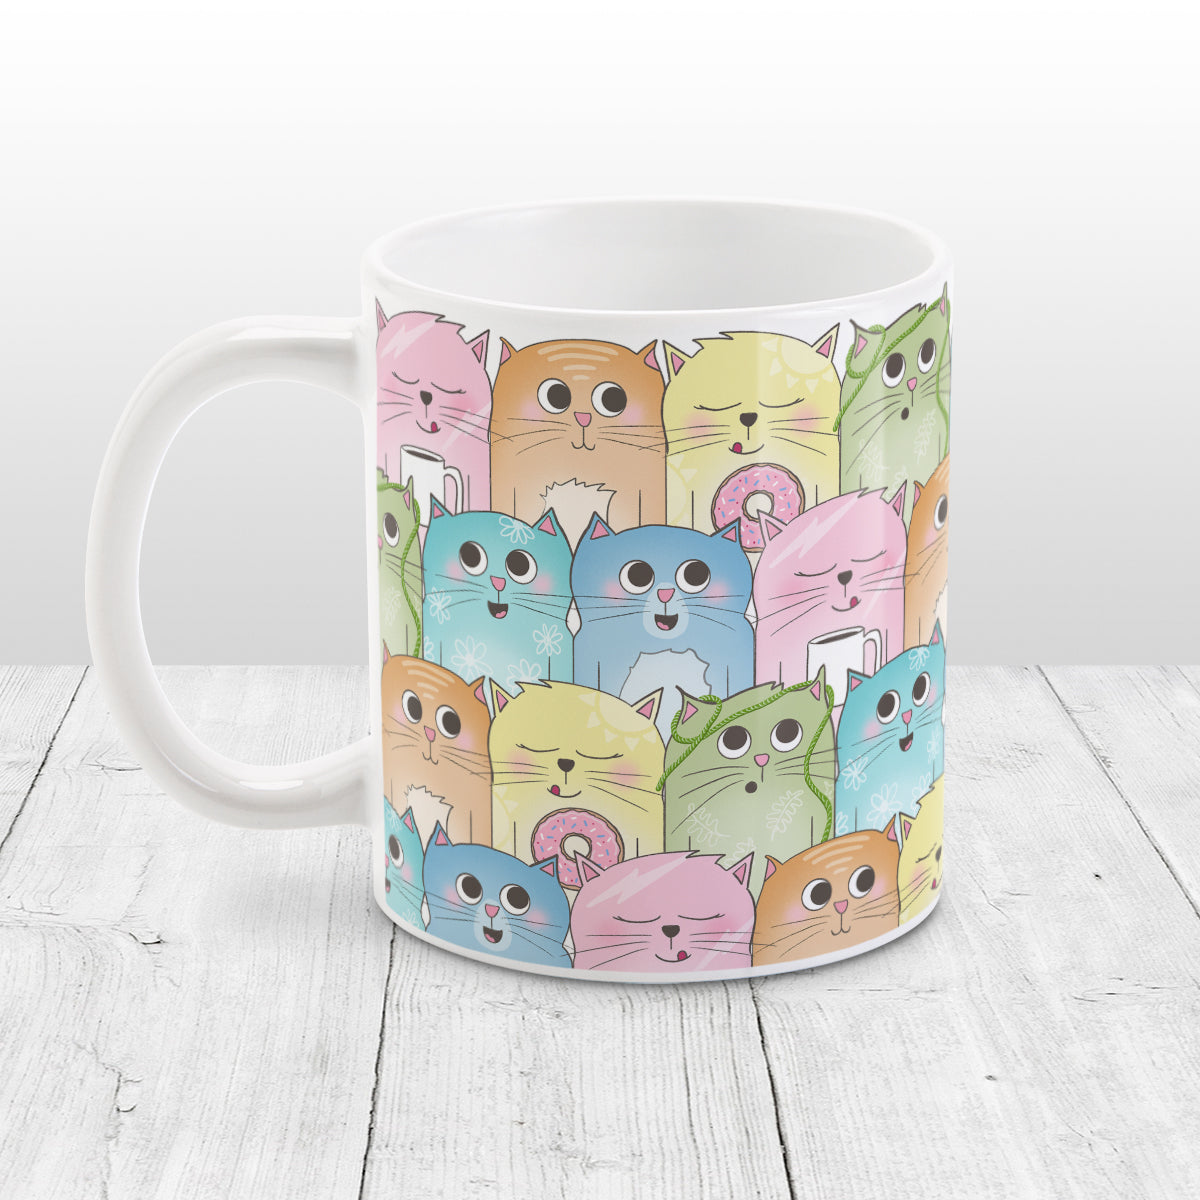 Colorful Cat Stack Pattern Mug (11oz) at Amy's Coffee Mugs. Cute cats mug with an illustrated pattern of different colorful cats (in pink, orange, yellow, green, turquoise, and blue) with different fun expressions, with yarn, coffee, and donuts. This stacked pattern of cats wraps around the ceramic mug to the handle.